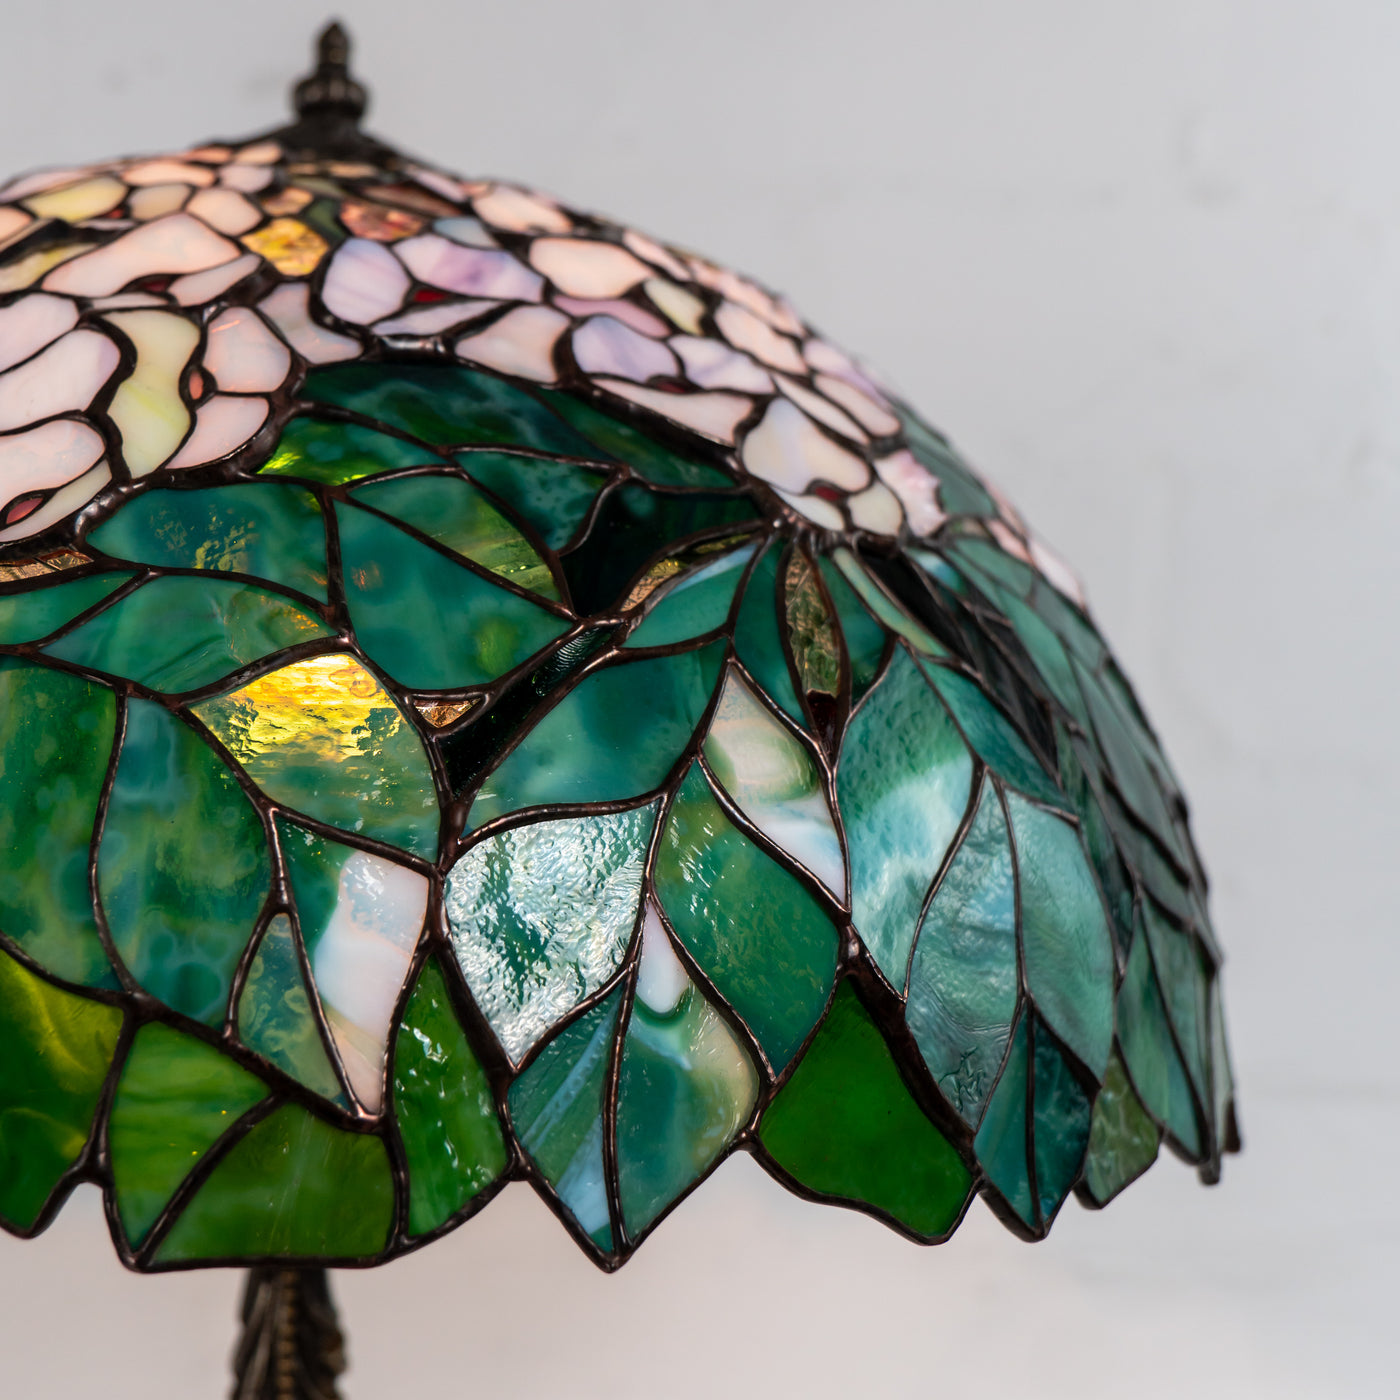 beautifully made stained glass lamp